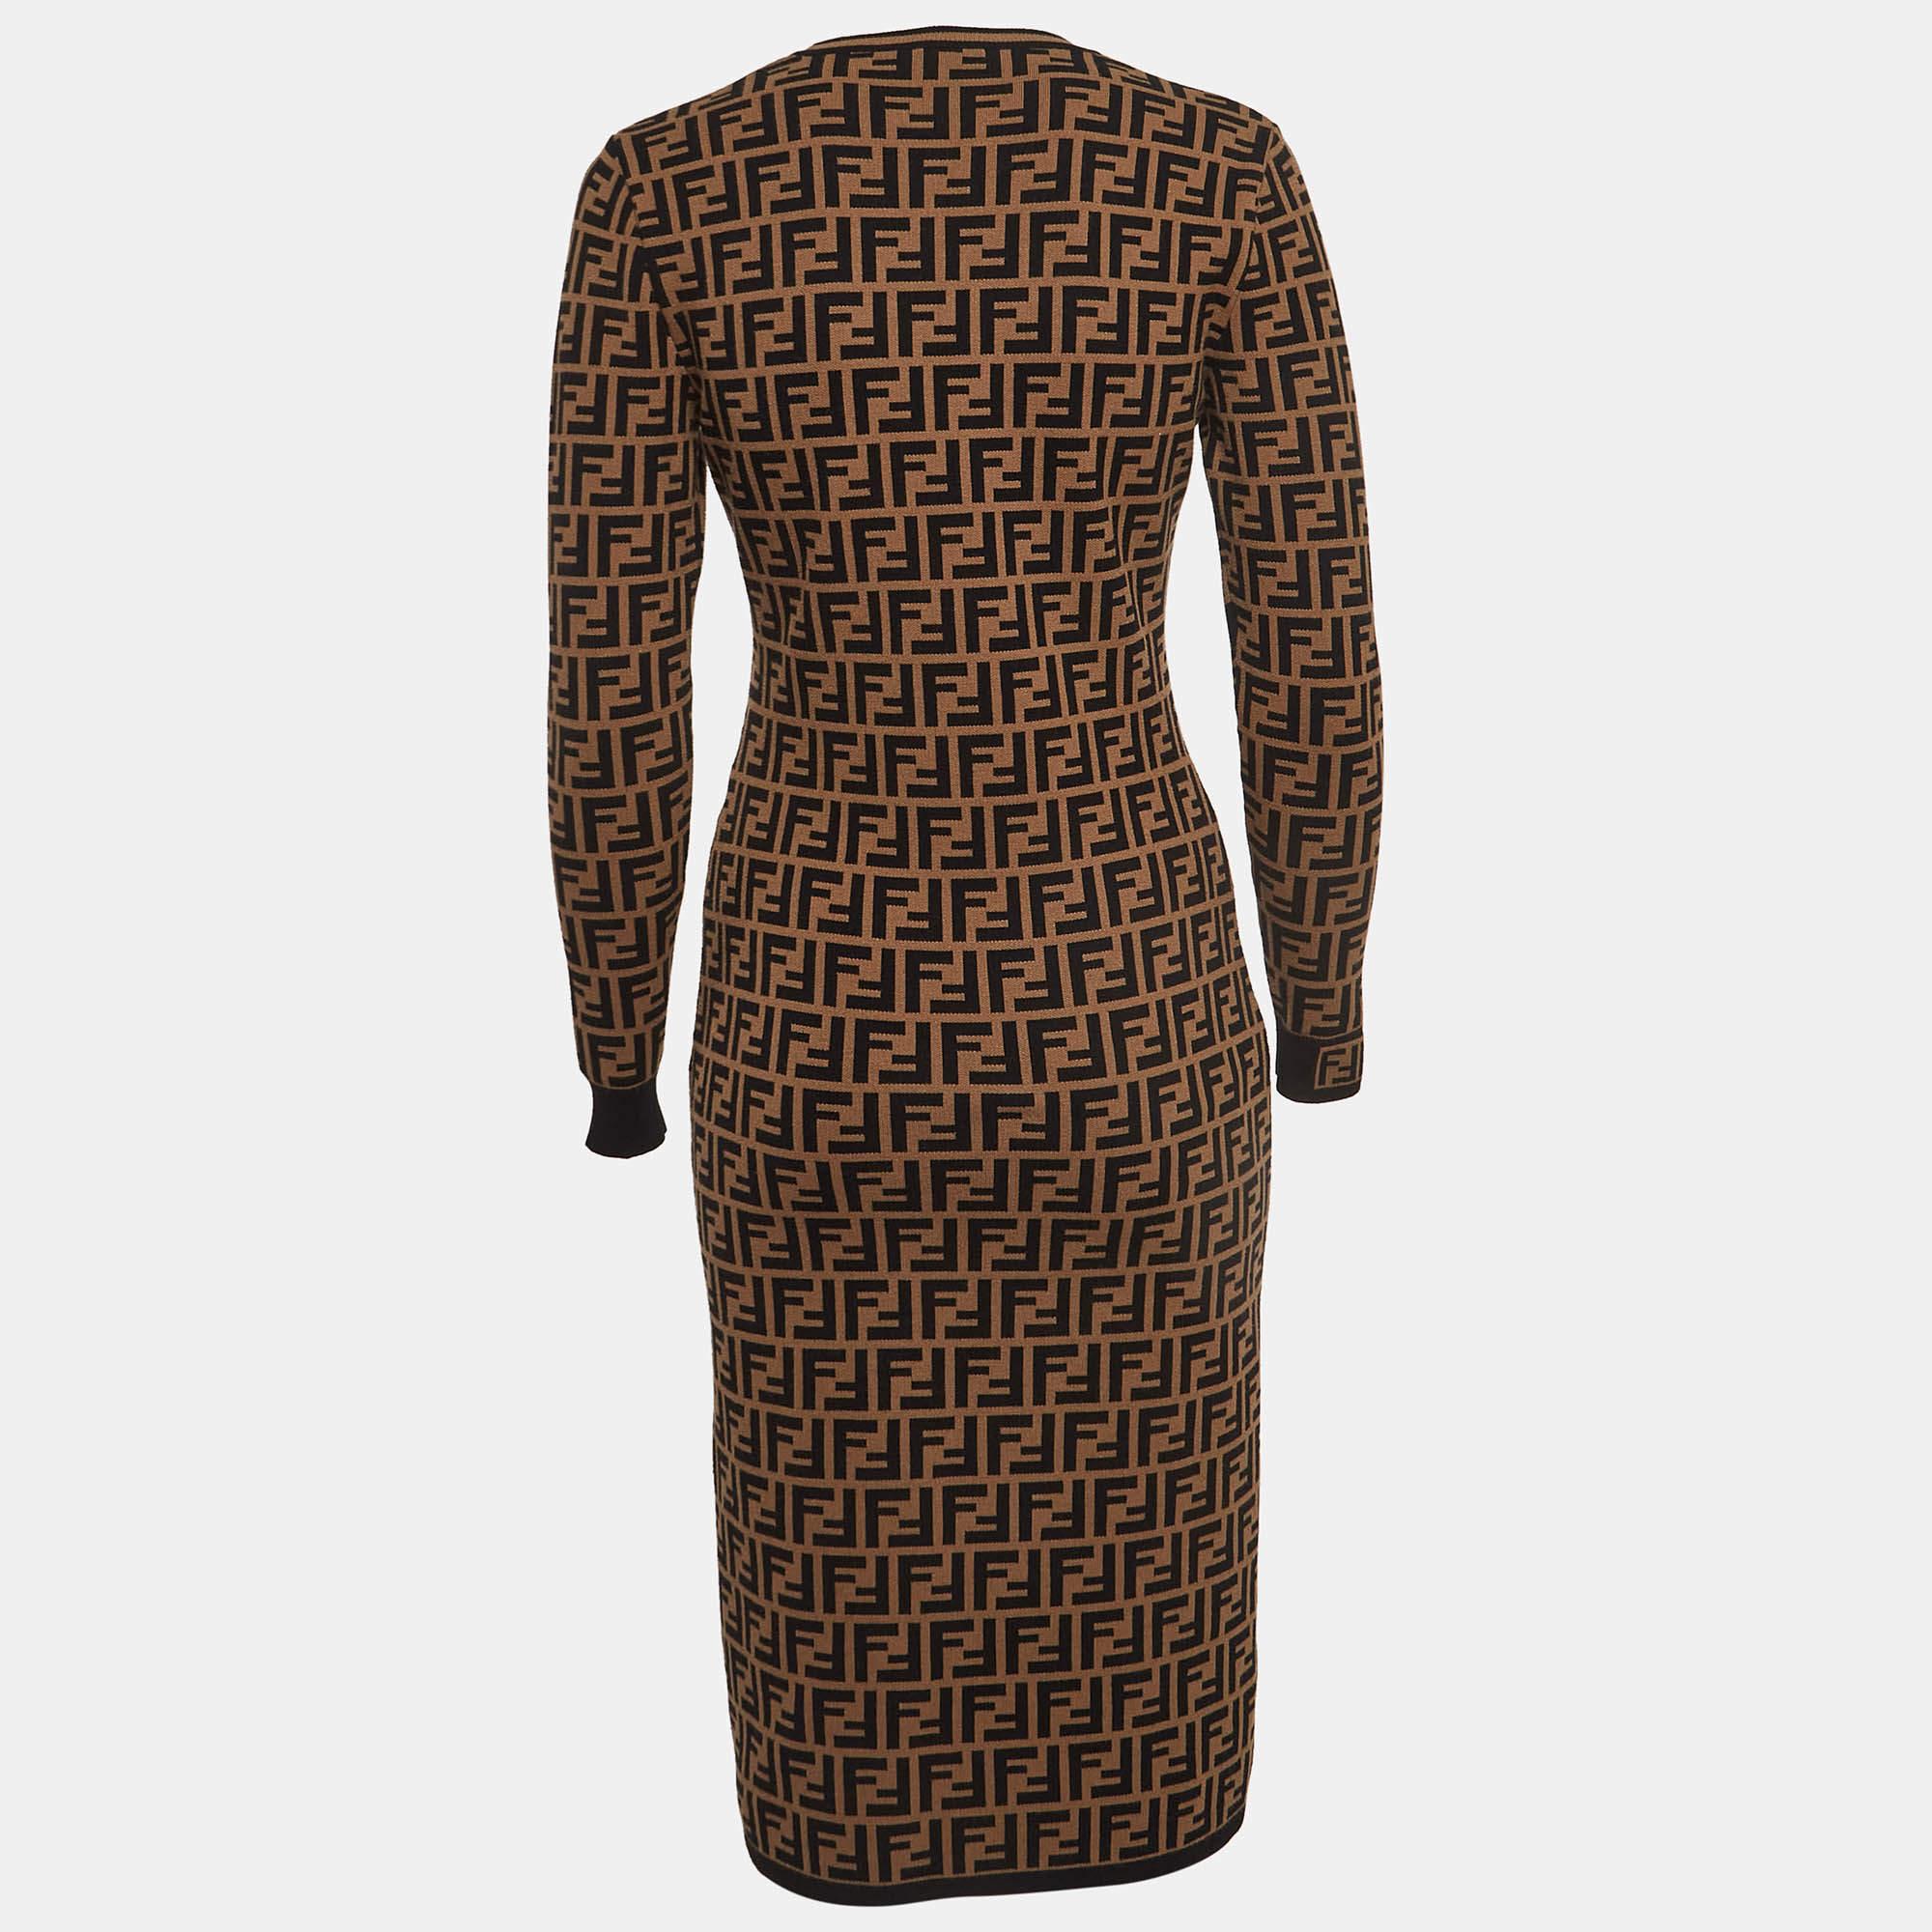 Experience the joy of expert tailoring with this designer dress for women. Meticulously made, it offers a flawless fit and luxe details, ensuring unmatched comfort. This beautiful creation will elevate your style effortlessly.

